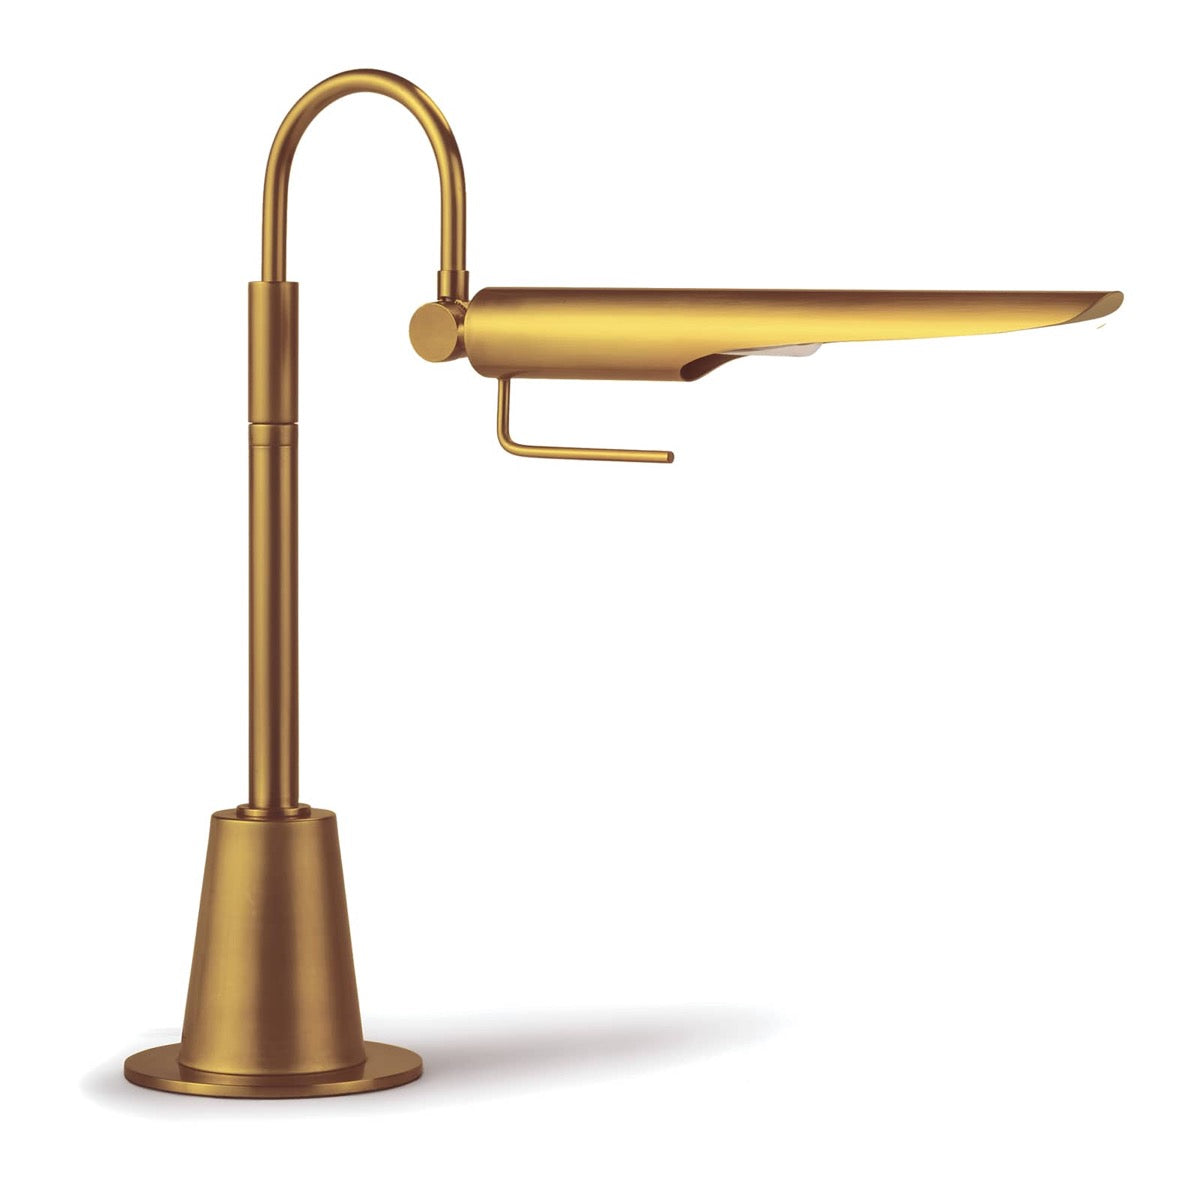 Heron Task Lamp Natural Brass. Right side view.